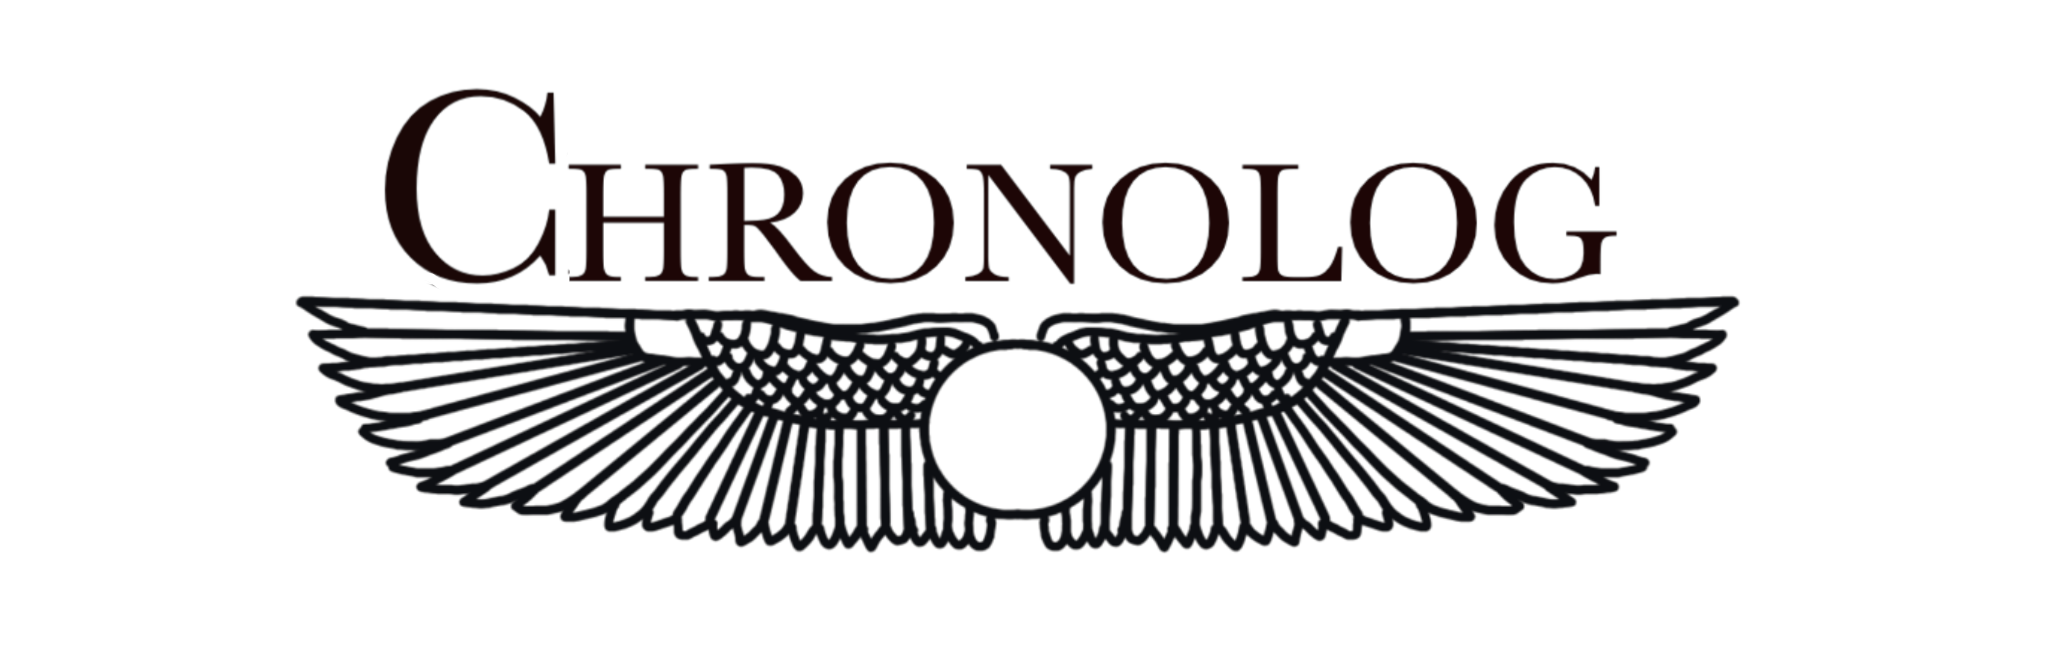 Chronolog is written above a line drawing of two vulture wings connected by a circle.